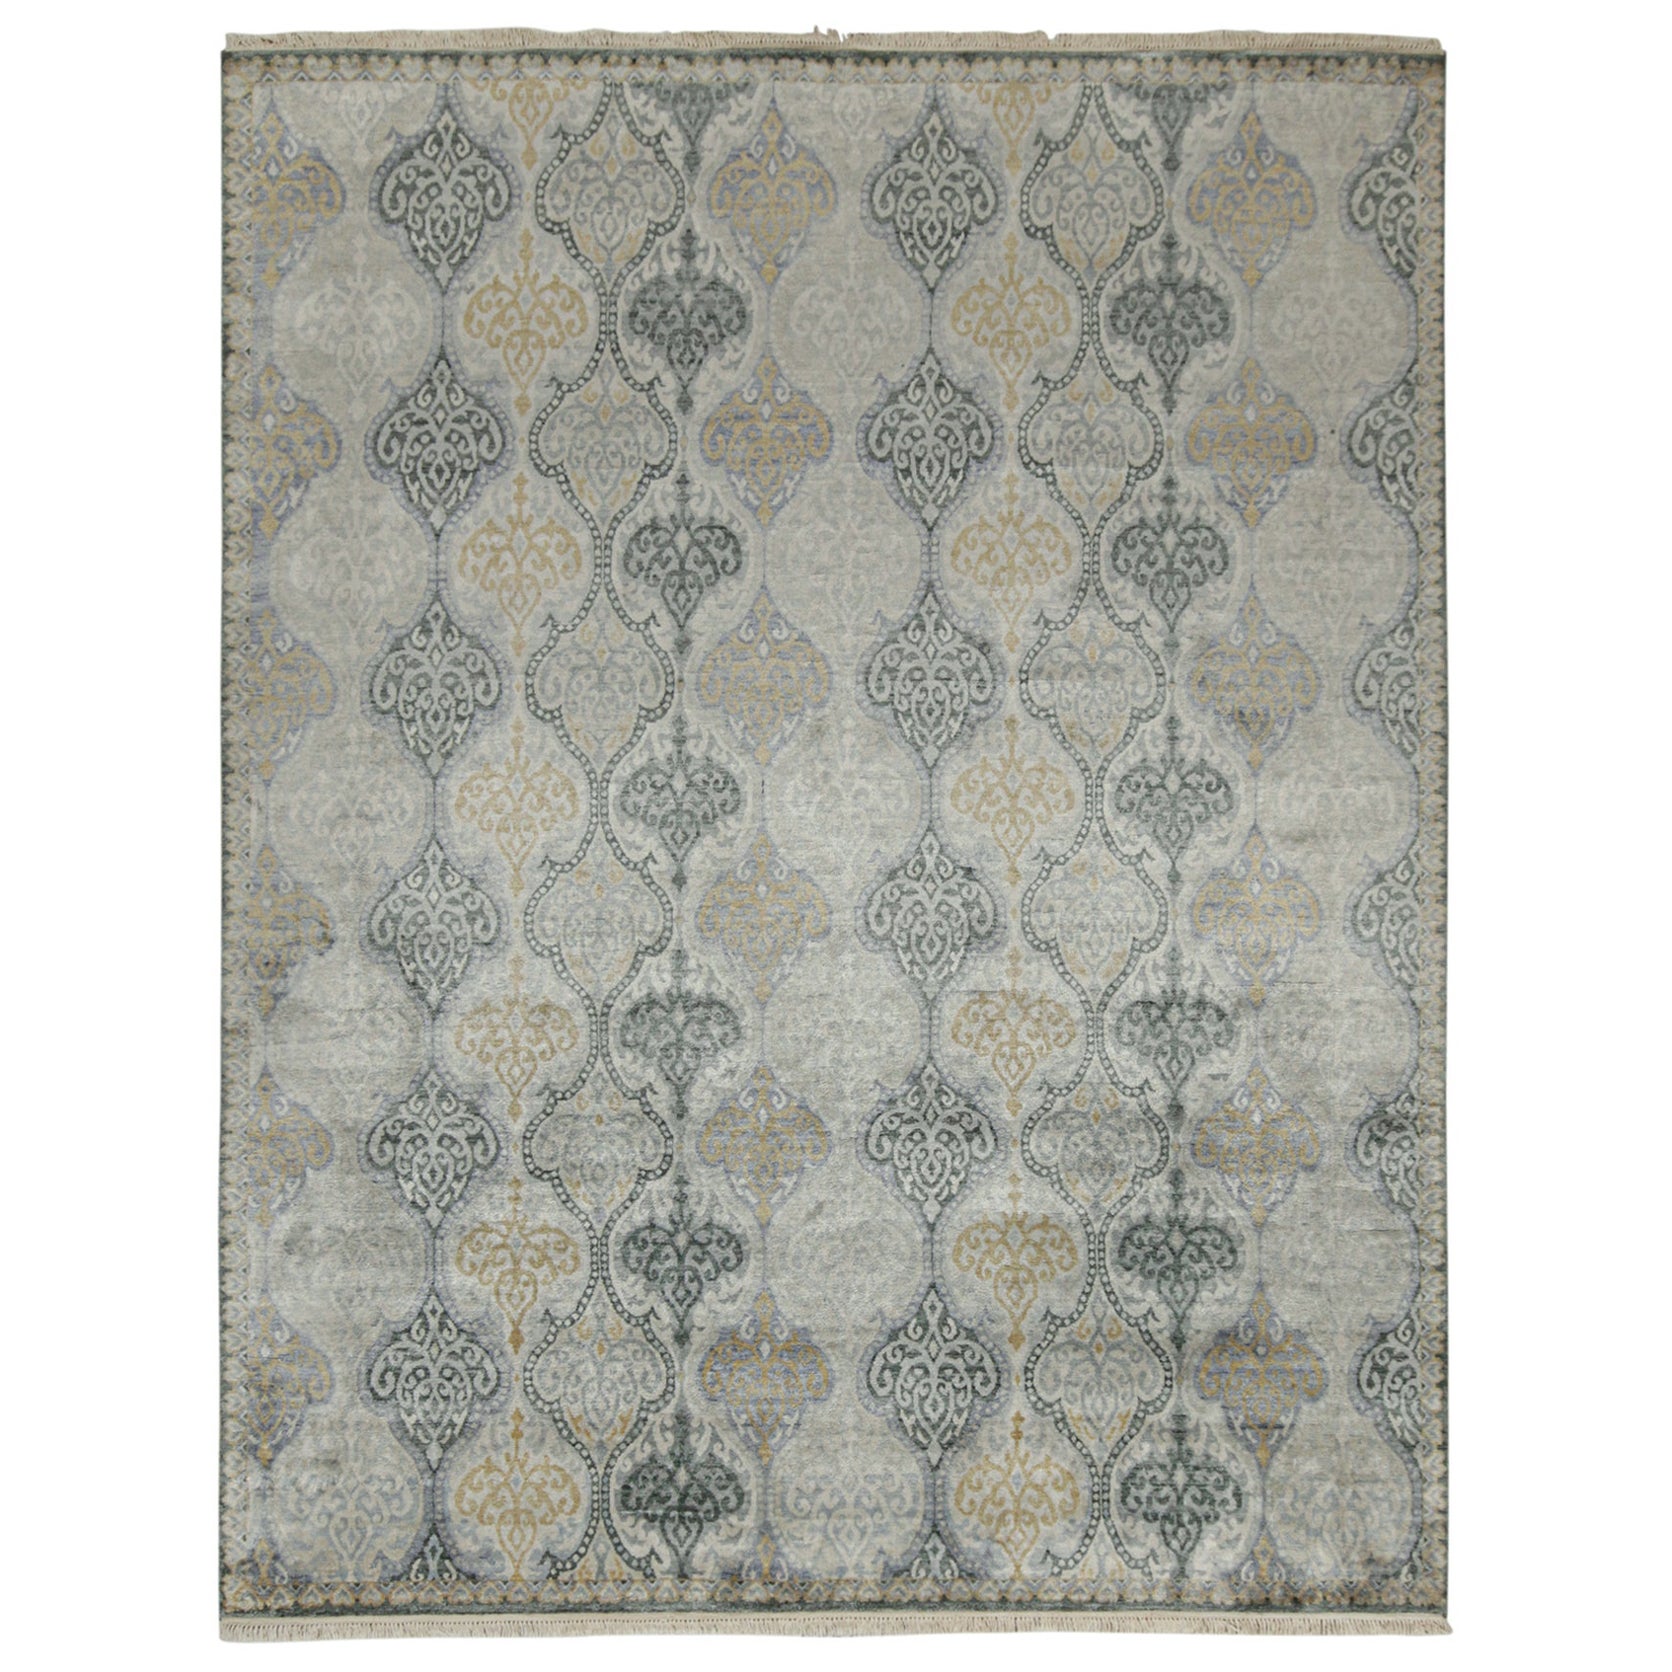 Rug & Kilim’s Classic Style Rug with Grey, Beige and Gold Pattern